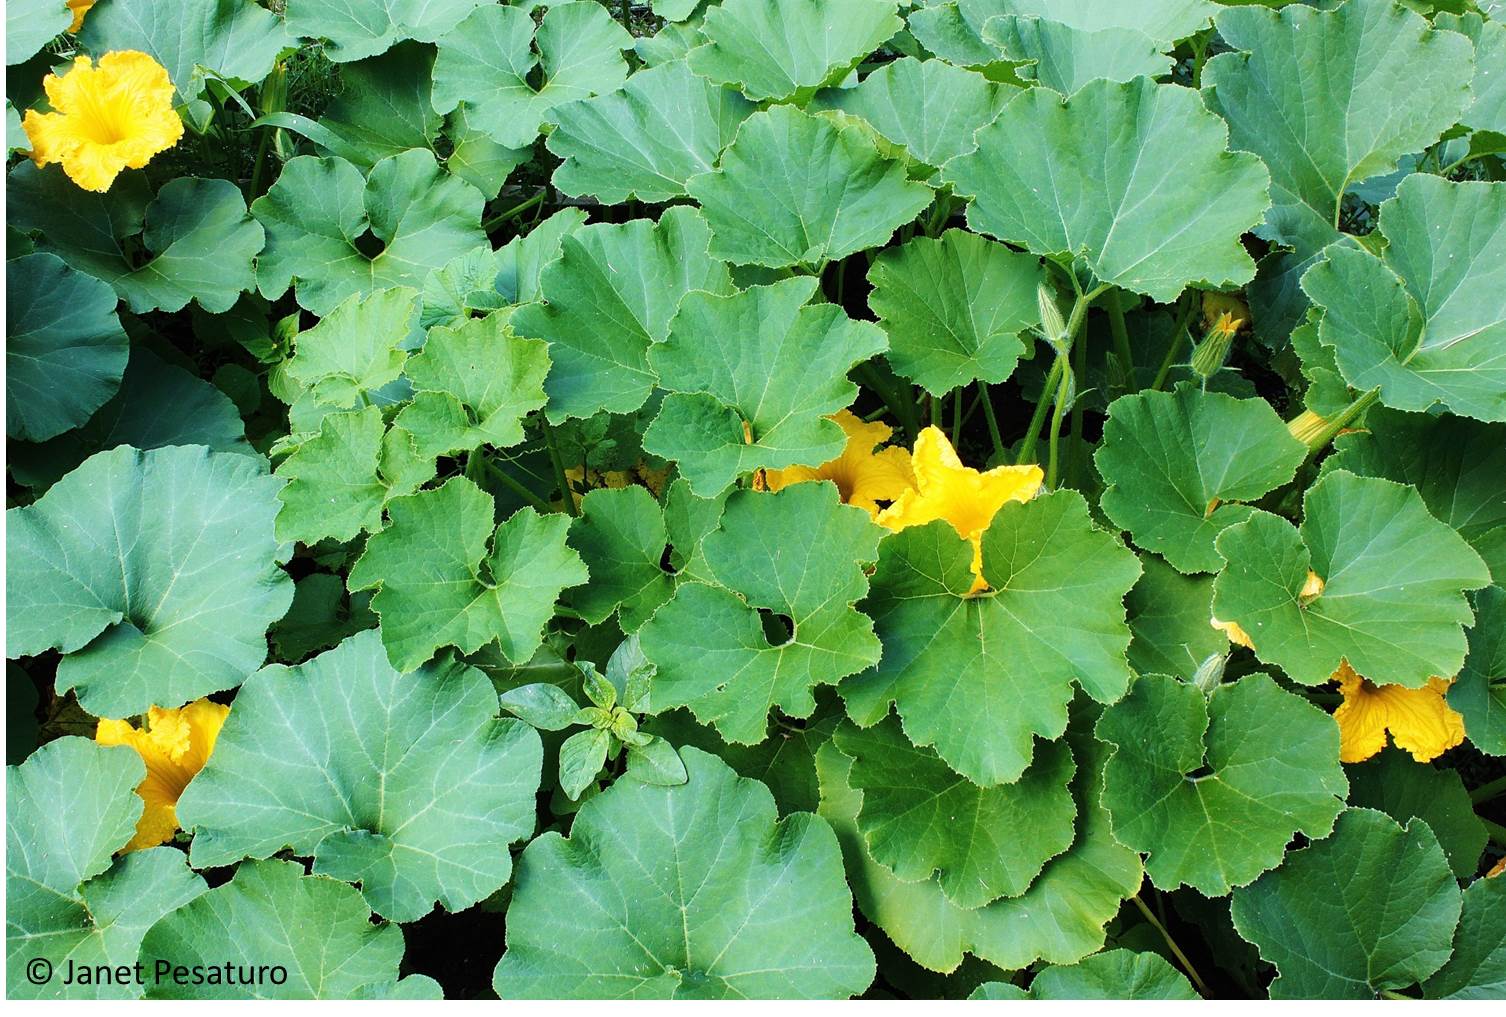 Squash Plants In Bloom 